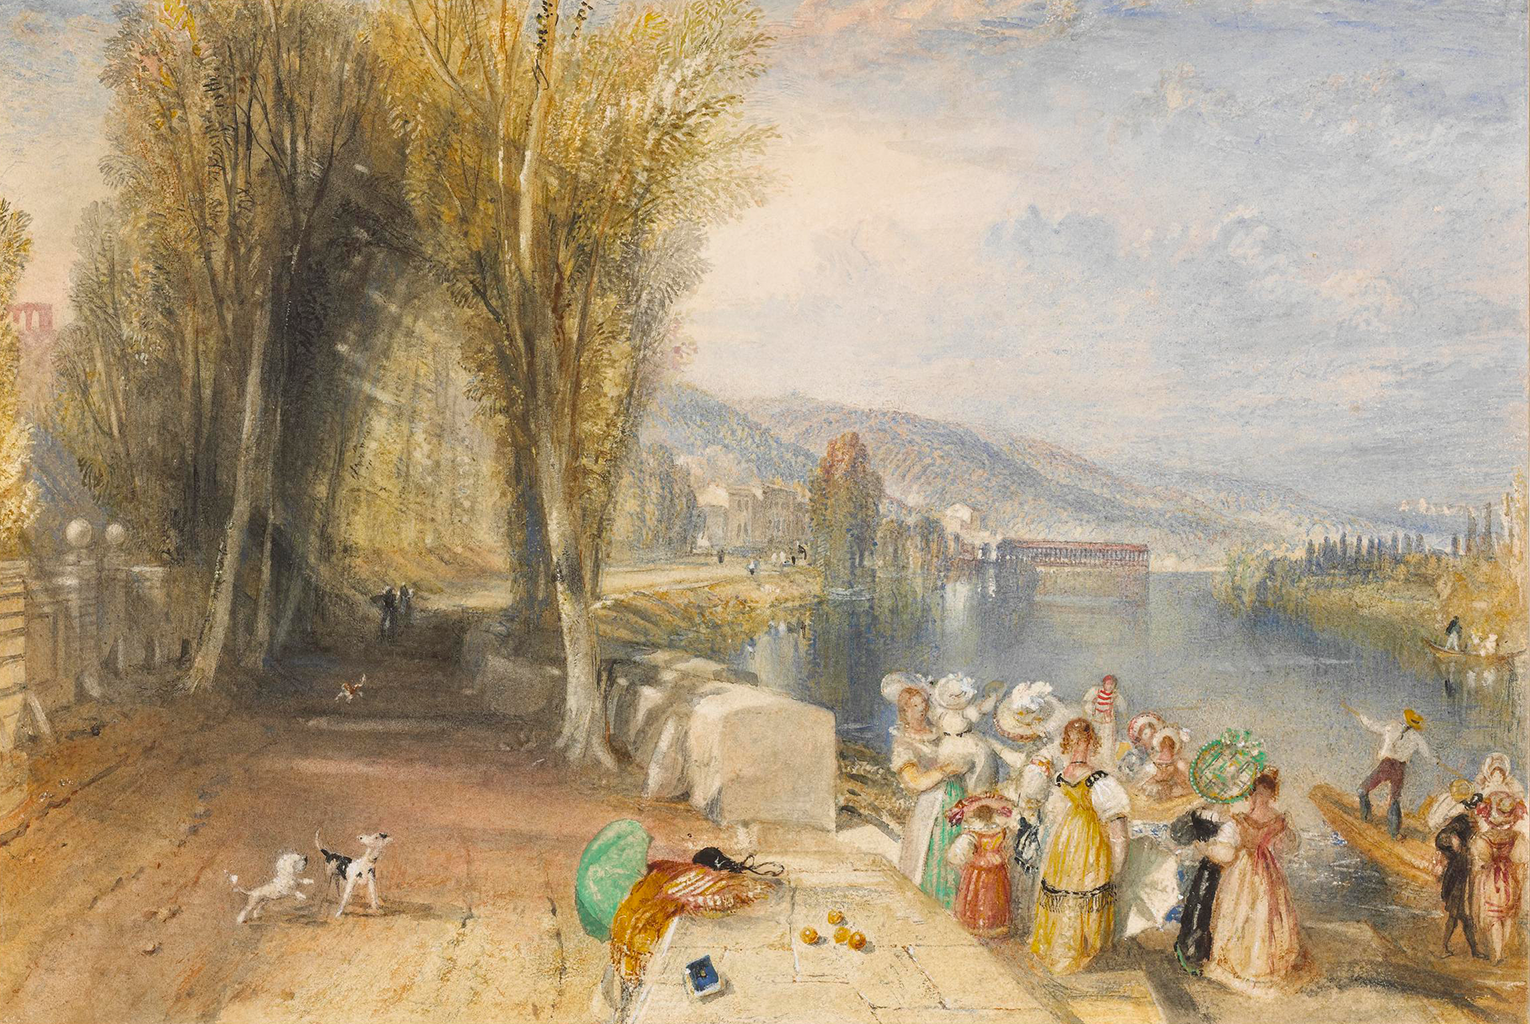 A painting depicting a crowd of people wearing large, feathered hats and colorful dresses. They are standing on the edge of a bank near a blue calm river. The group waves to and greets a man standing on top of a small wooden boat. Also in the river, there is another wooden boat filled with passengers. To the left of the group are three dogs standing on a dirt path that cuts under two tall trees and leads to a town in the distance. In the background are large green hills and tall trees. The sky above is cover by an overcast of large clouds.